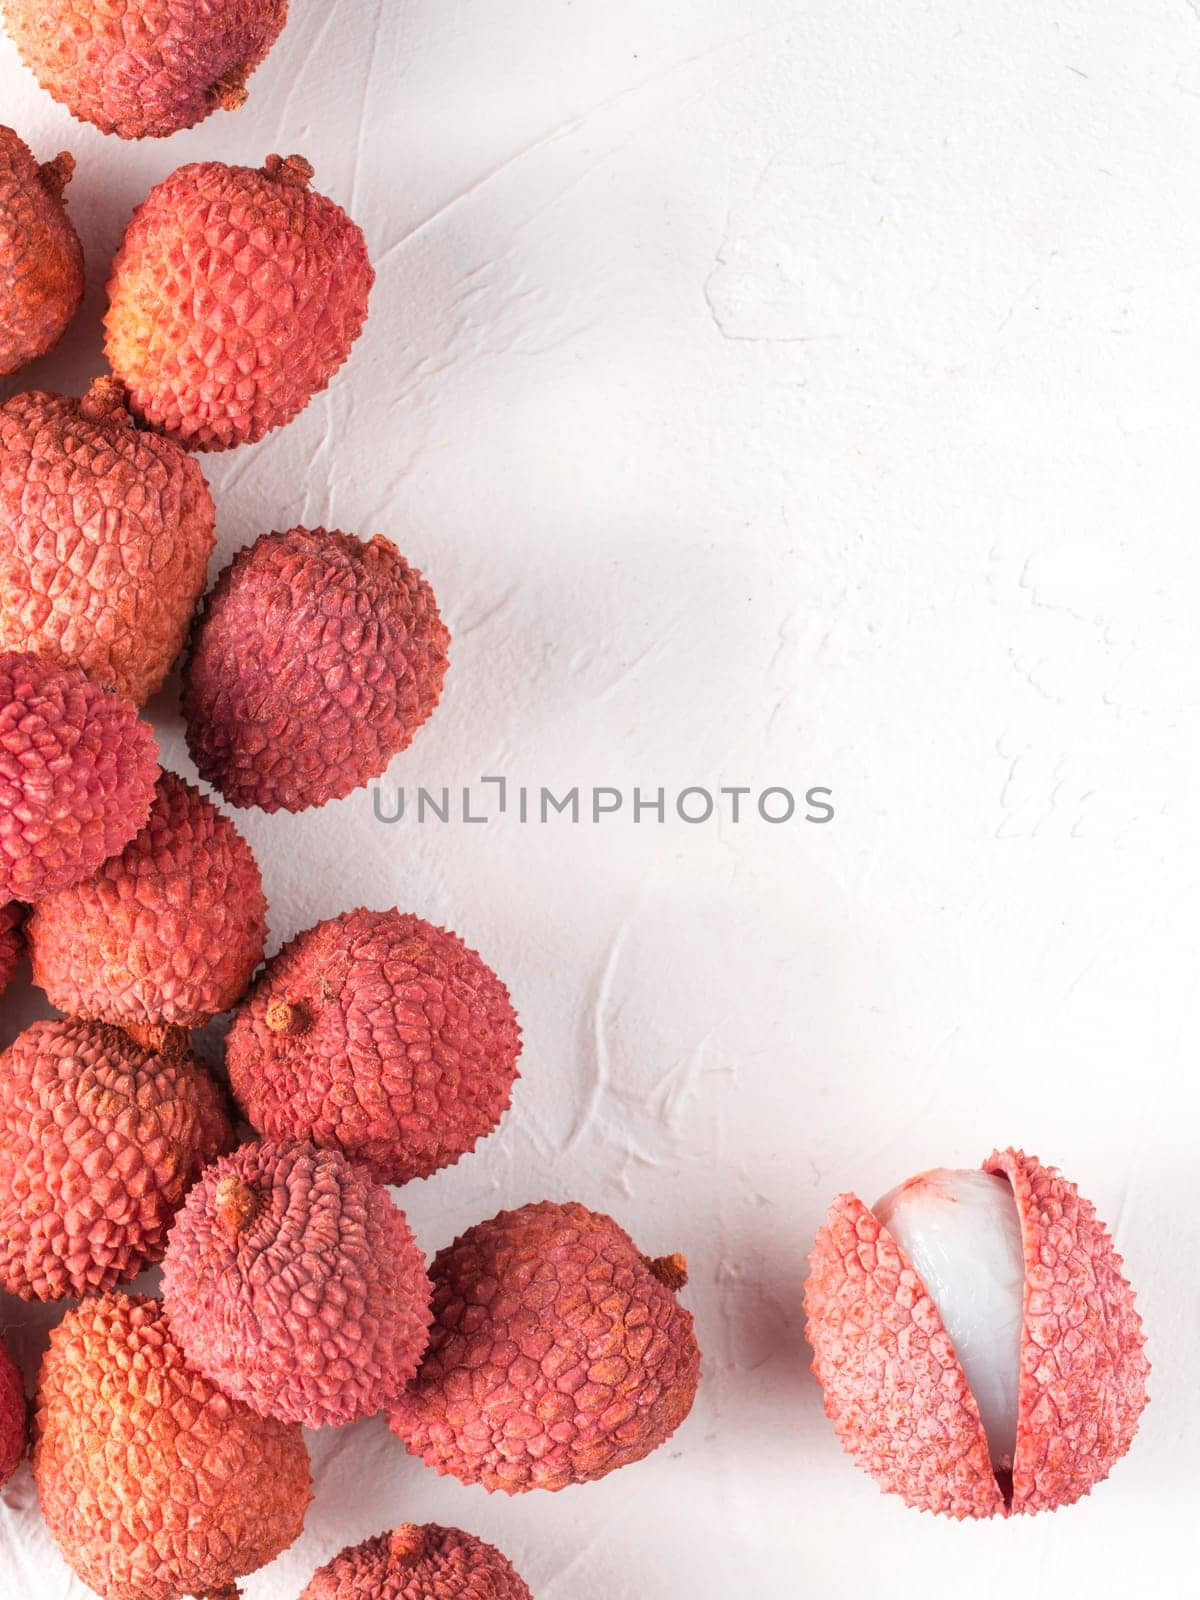 lichee fruit on white textured background. Lichee wit copy space. Top view or flat lay. Vertical